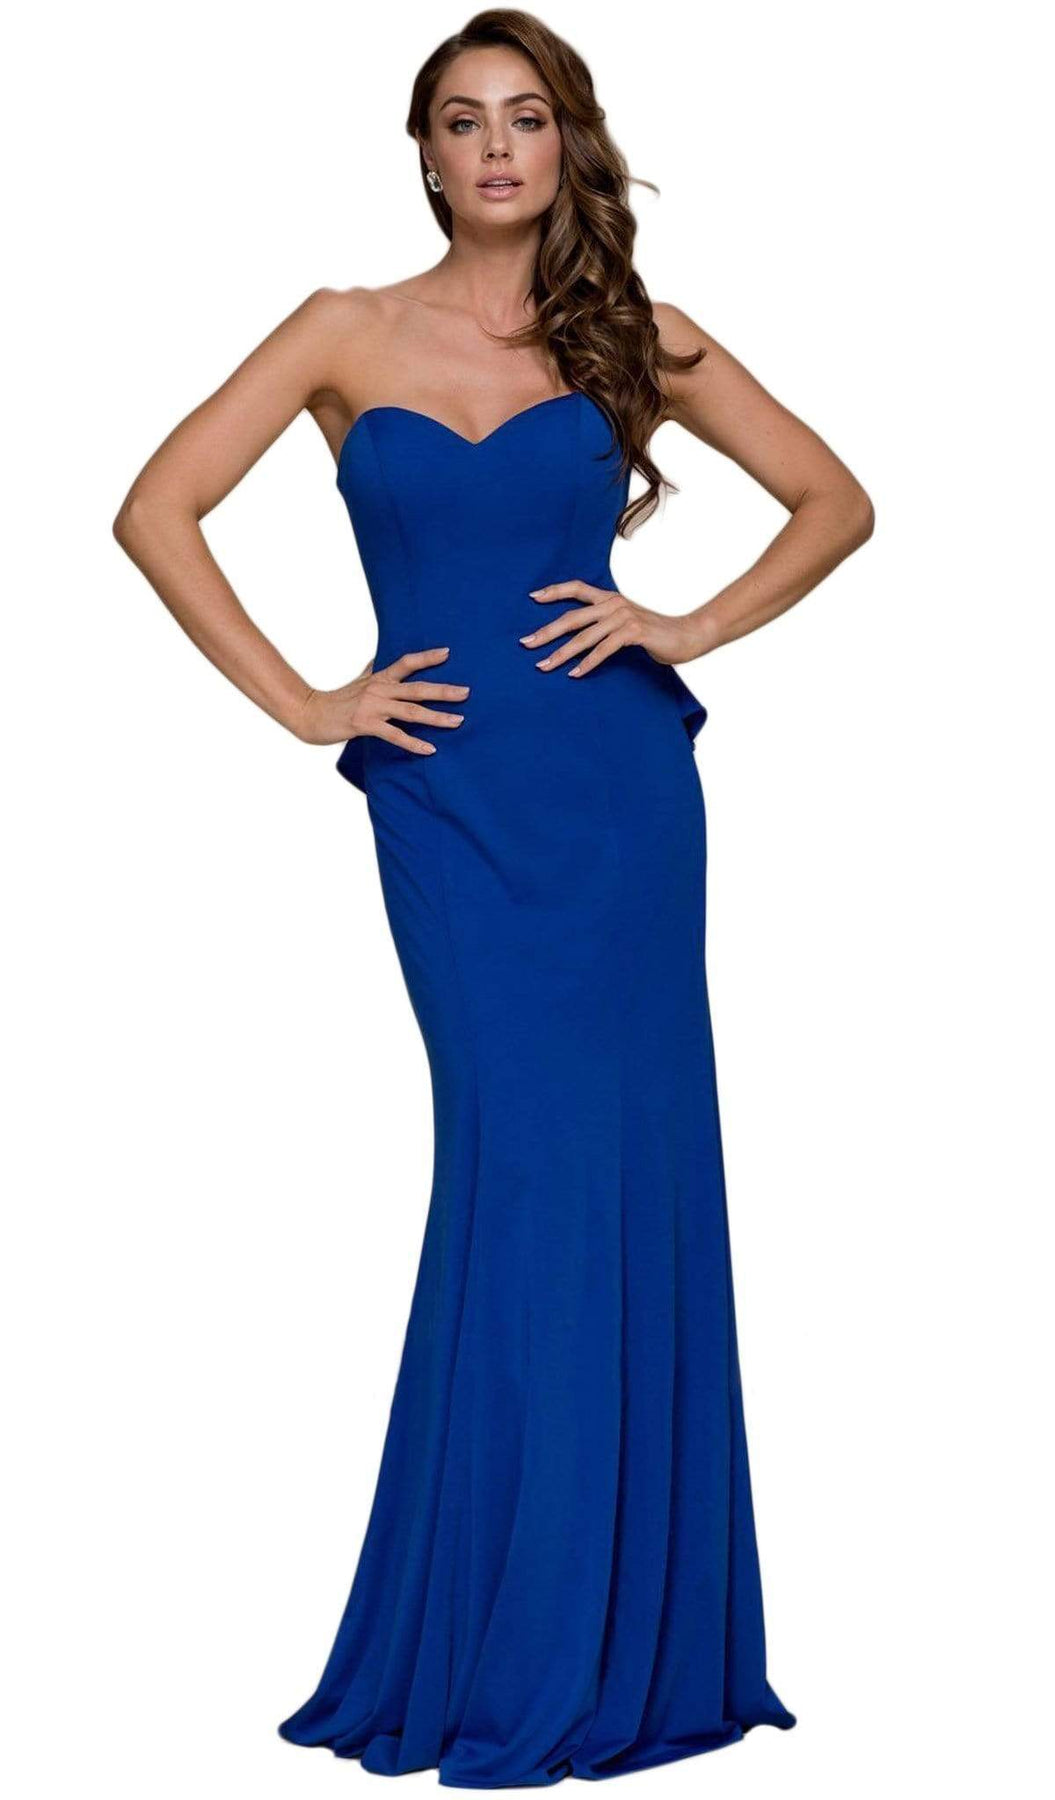 Nox Anabel - E002 Strapless Sweetheart Ruffled Sheath Dress Special Occasion Dress XS / Royal